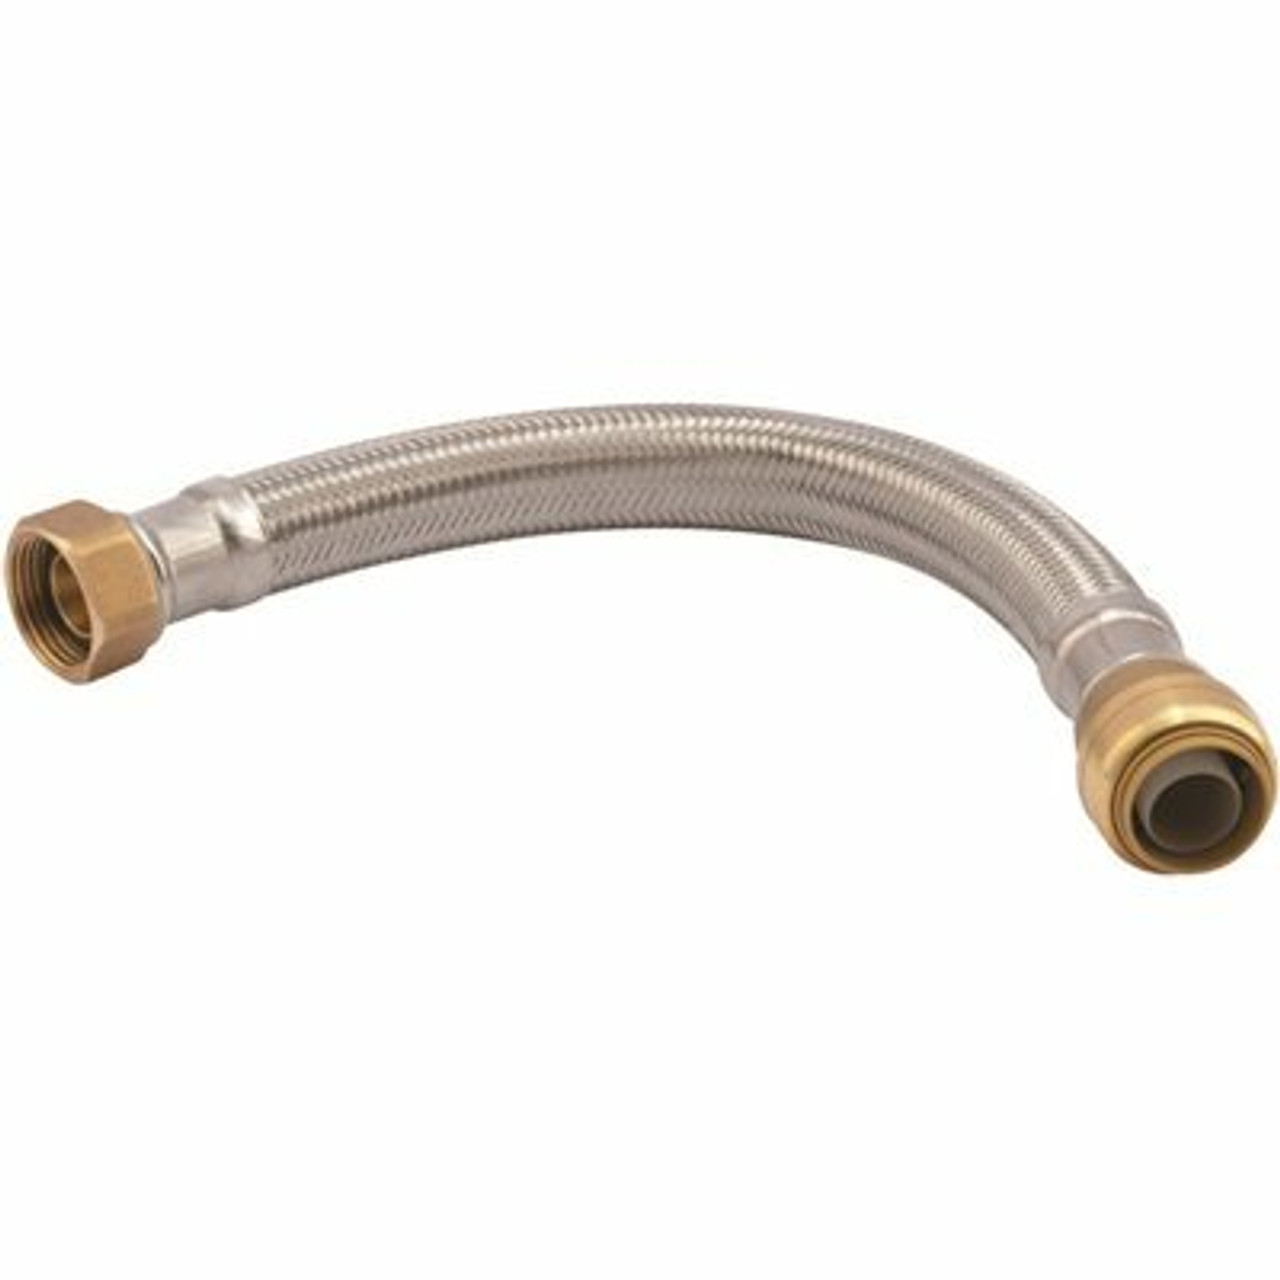 Sharkbite 3/4 In. Push-To-Connect X 3/4 In. Fip X 12 In. Braided Stainless Steel Water Heater Connector